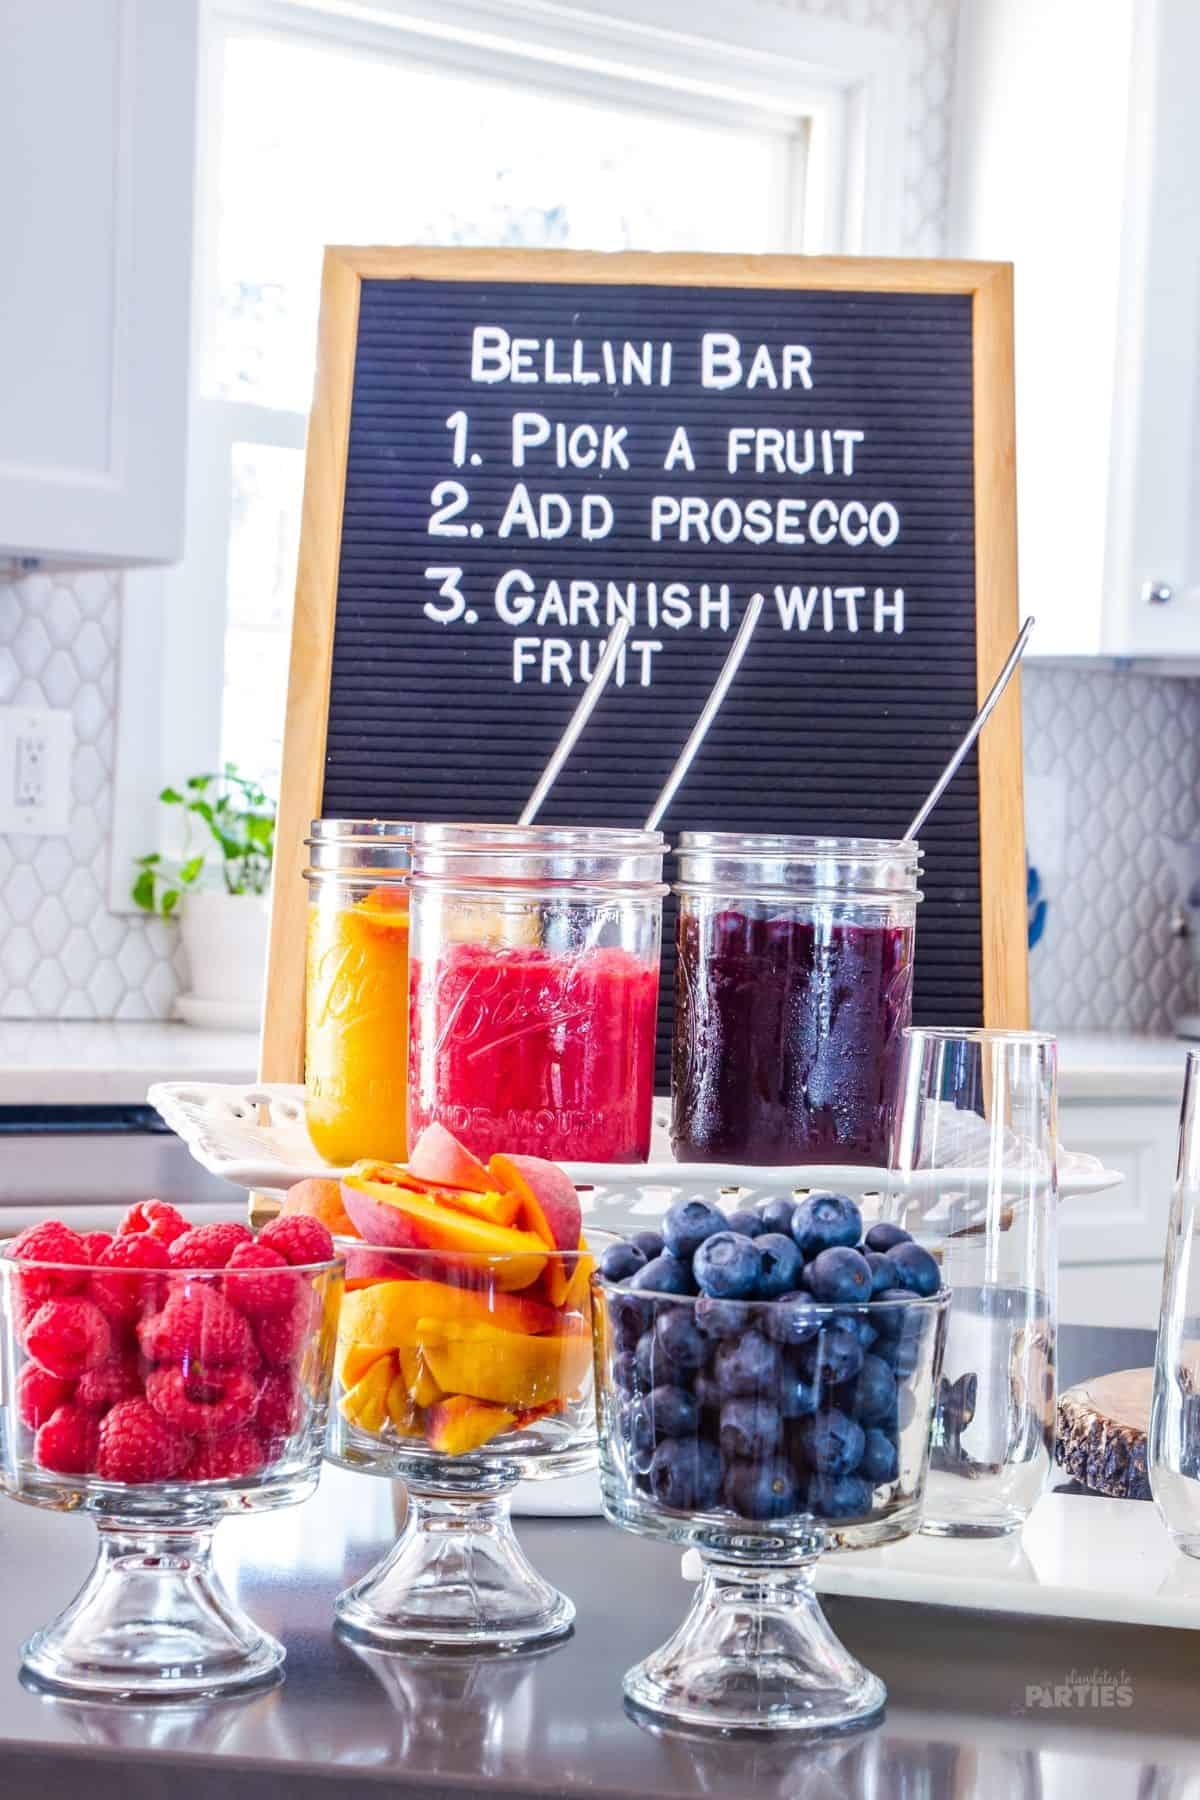 A Bellini bar with a felt letter board and three fruit purees.